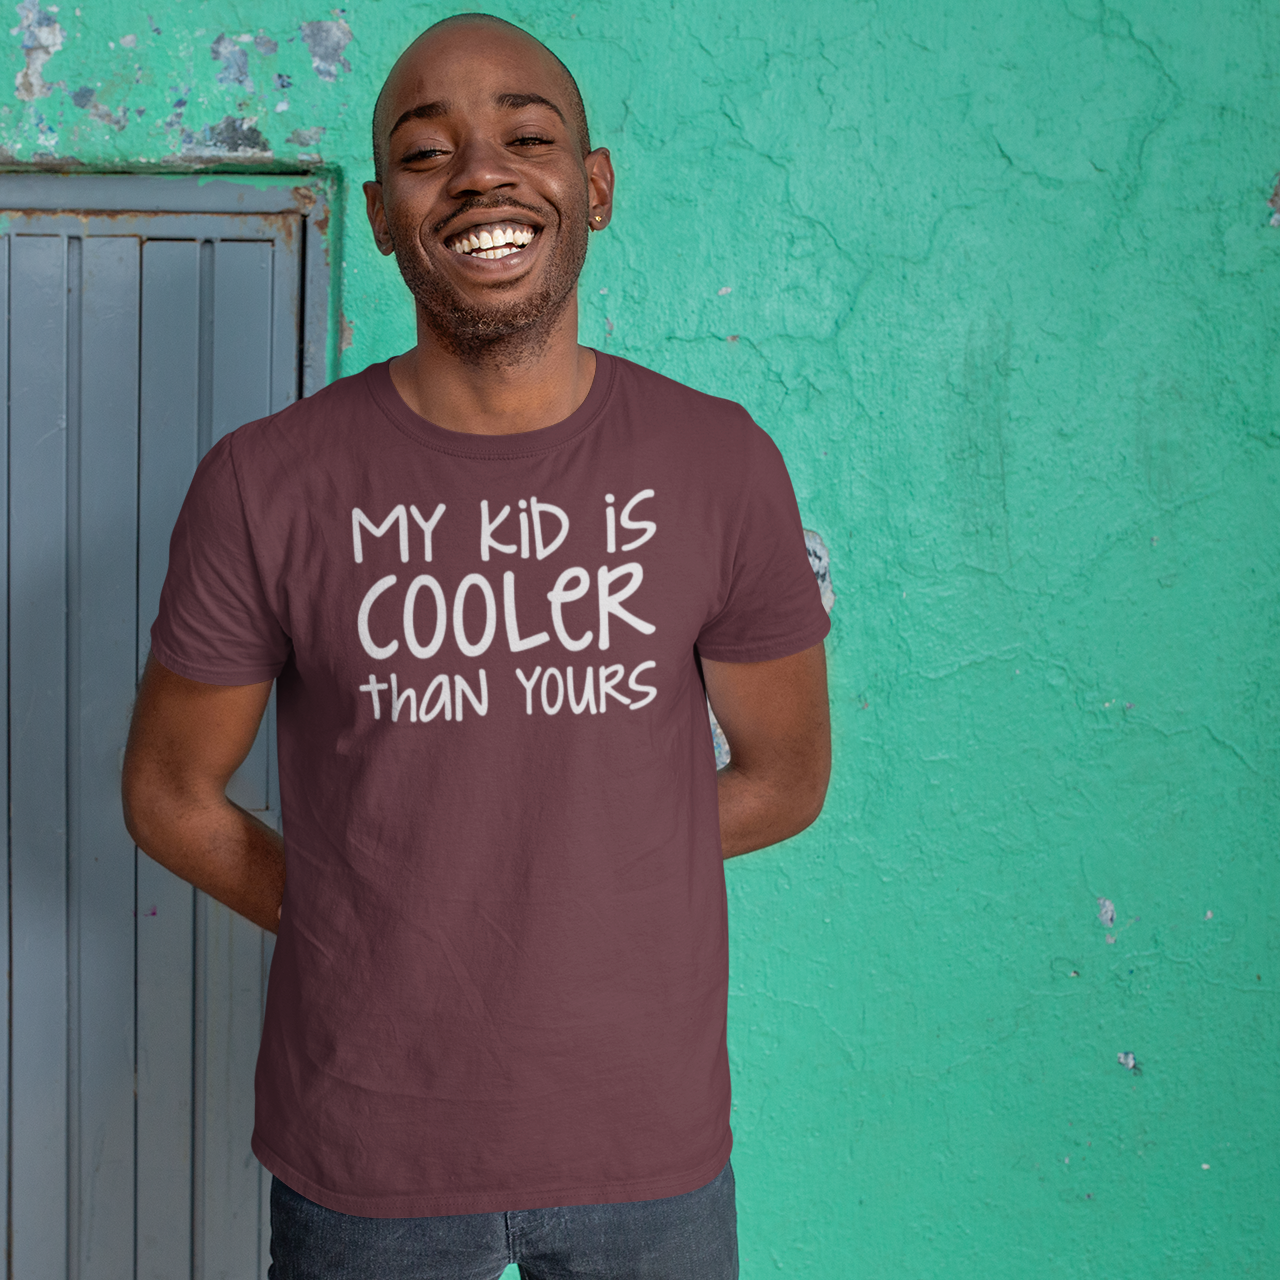 'My kid is cooler than yours' adult shirt